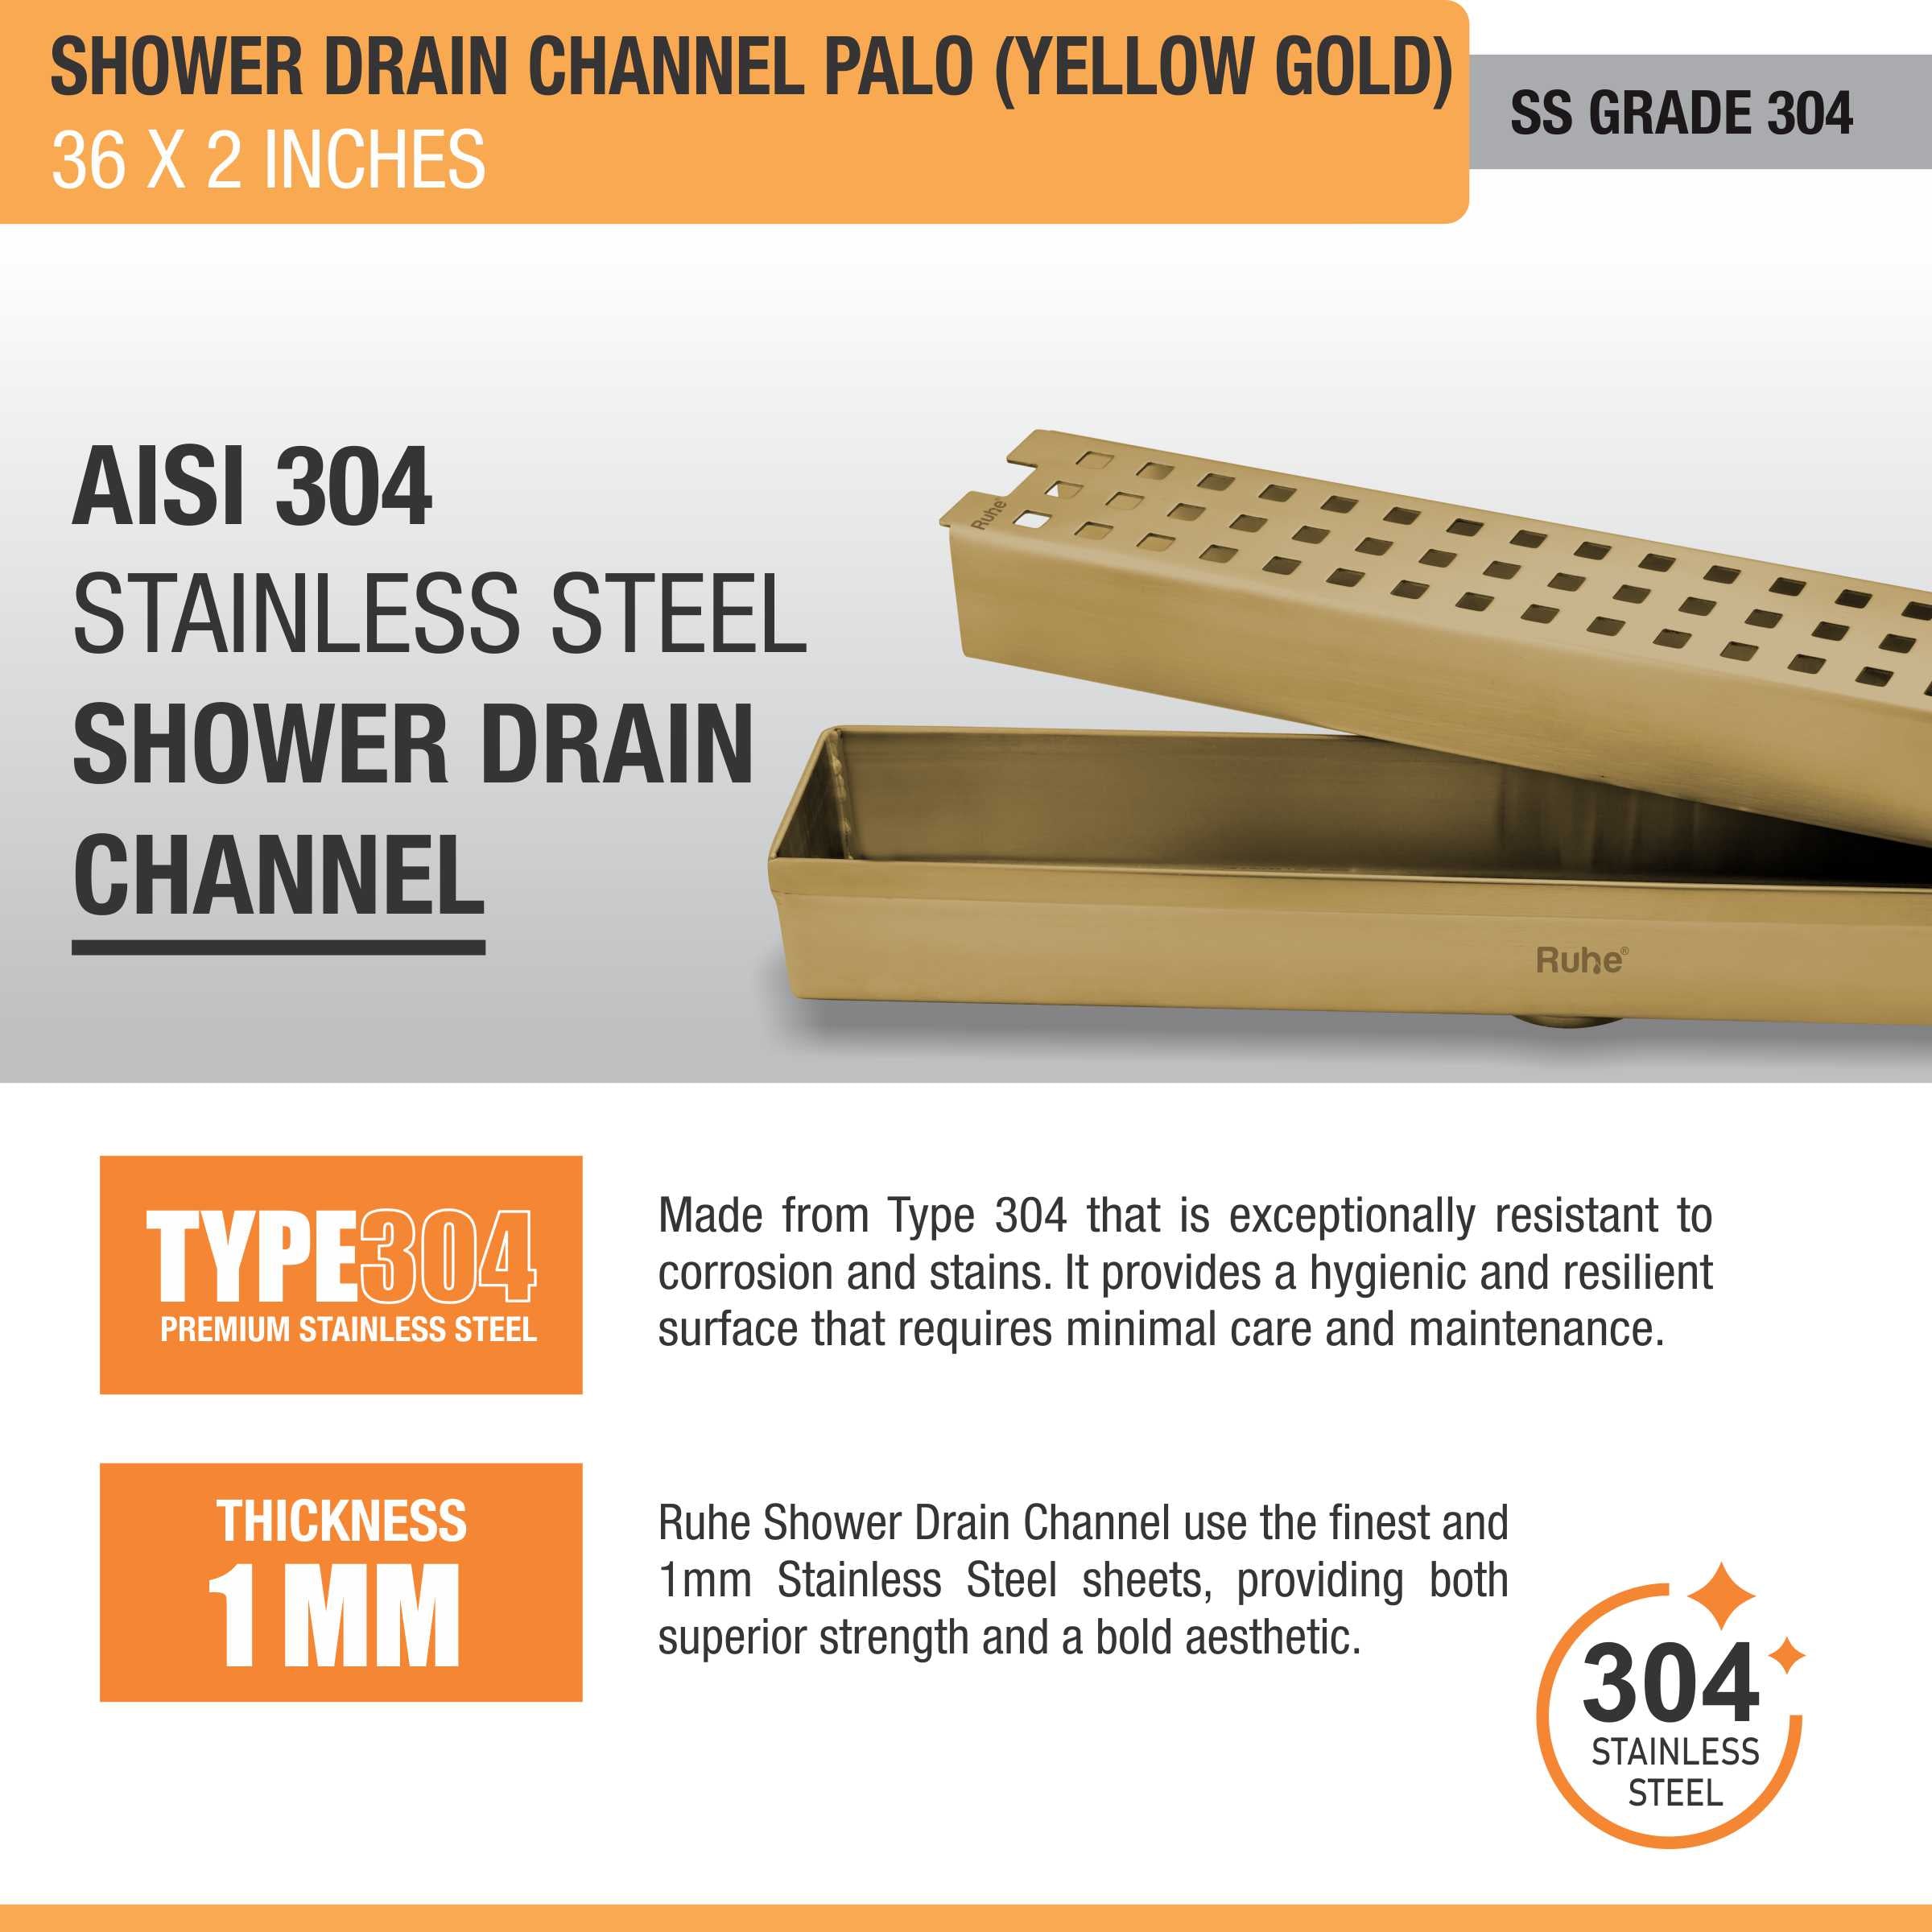 Palo Shower Drain Channel (36 x 2 Inches) YELLOW GOLD stainless steel